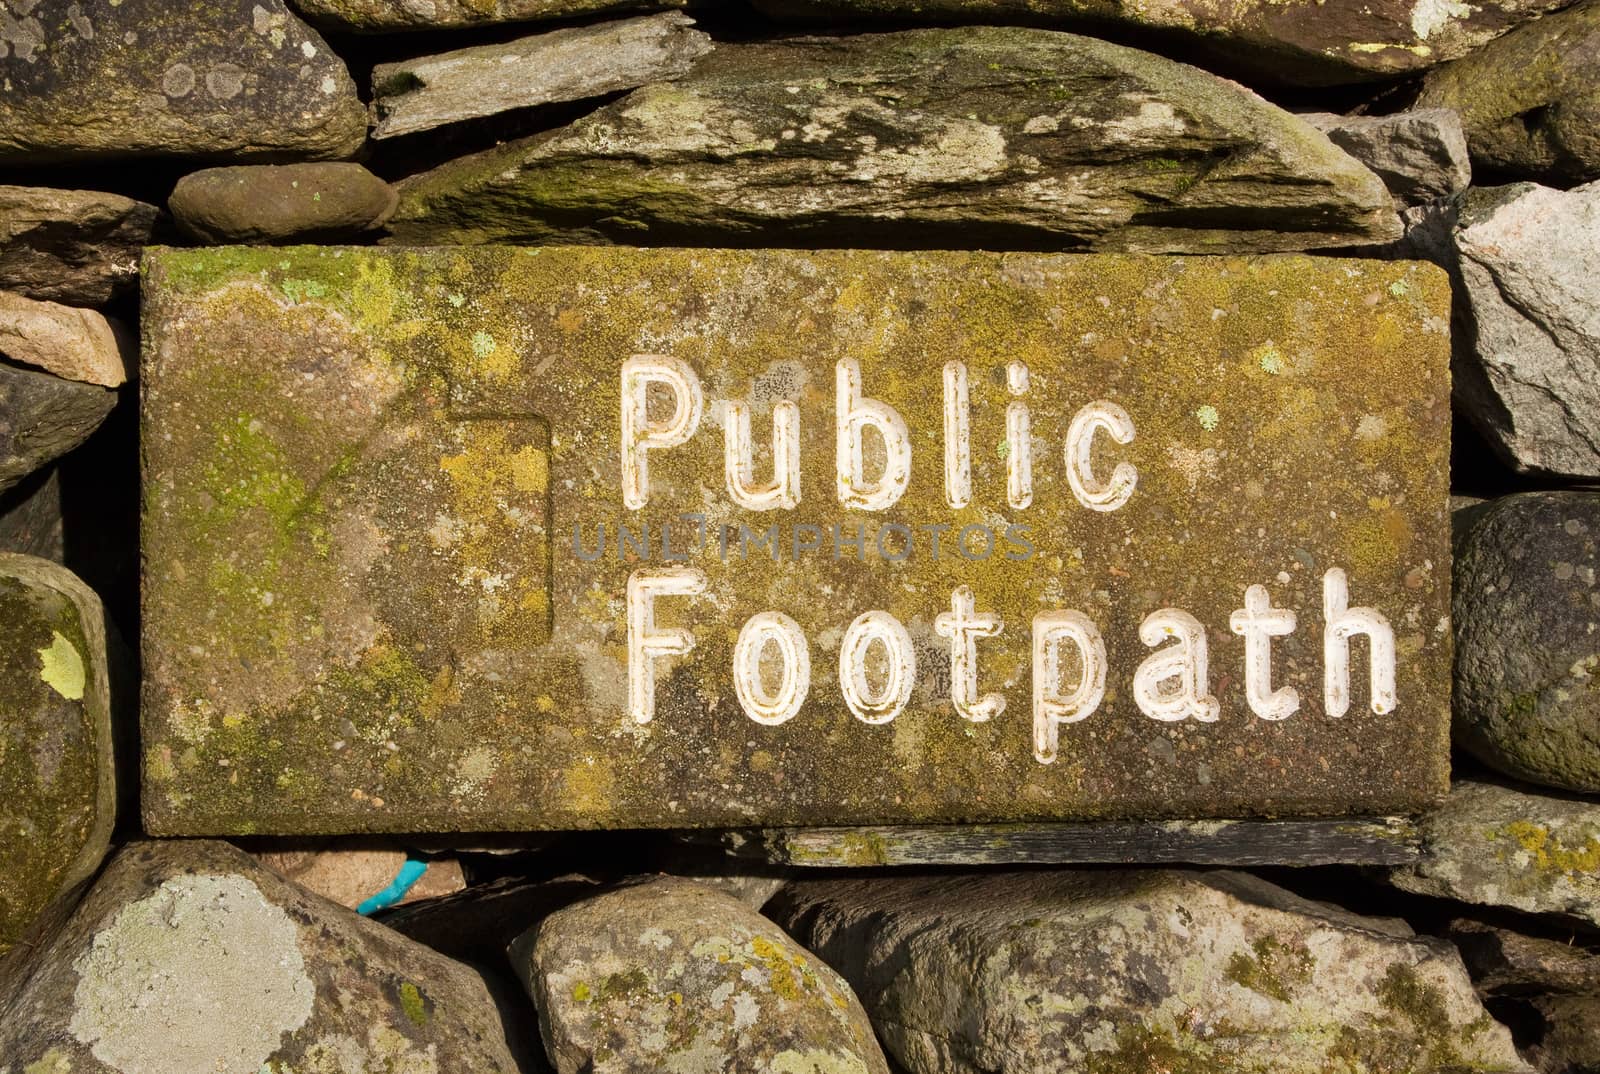 Stone Public Footpath Sign by ATGImages